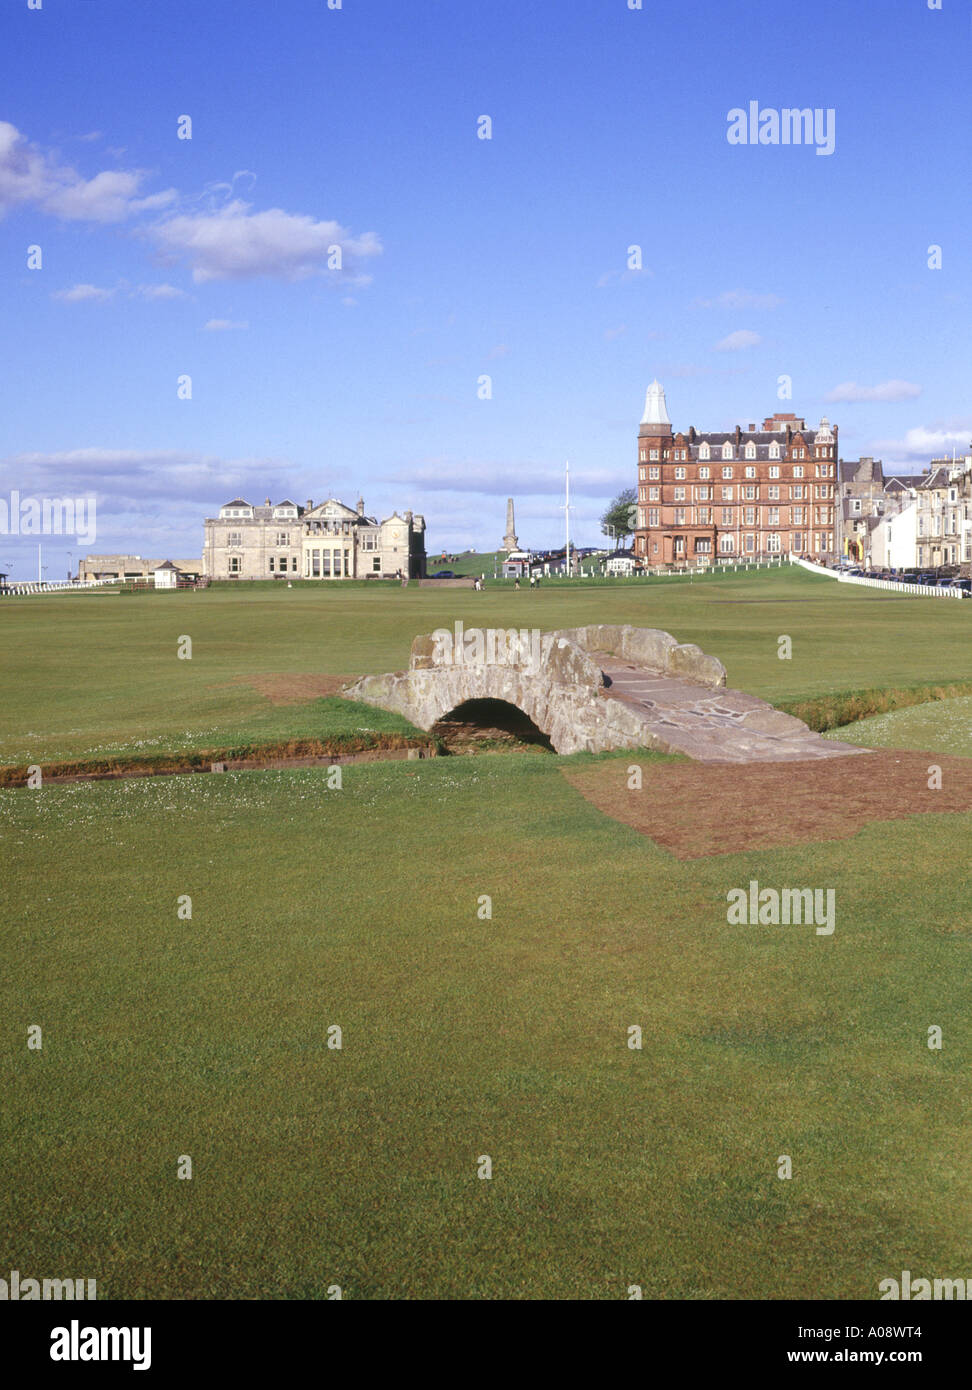 dh Golf ST ANDREWS FIFE Swilcan bridge across burn eighteenth fairway Royal and Ancient course scotland 18 old Stock Photo